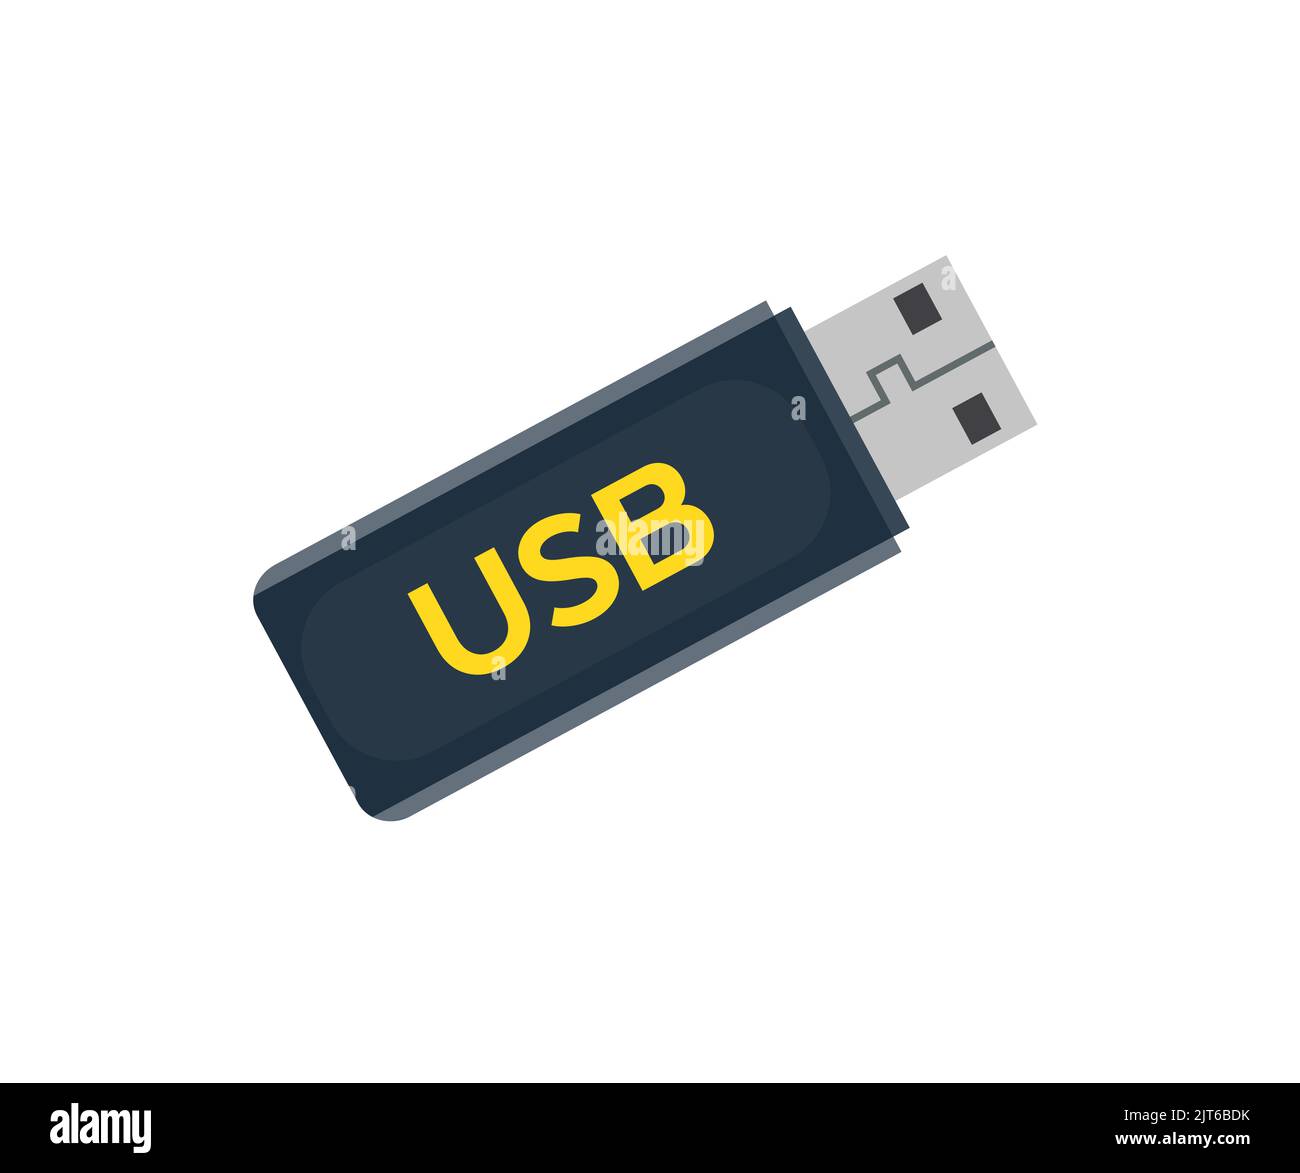 Flash drive usb, Compact data storage device. Memory stick logo design. Personal Information Cyber Security Concept. Usb flash drive and obsolete. Stock Vector